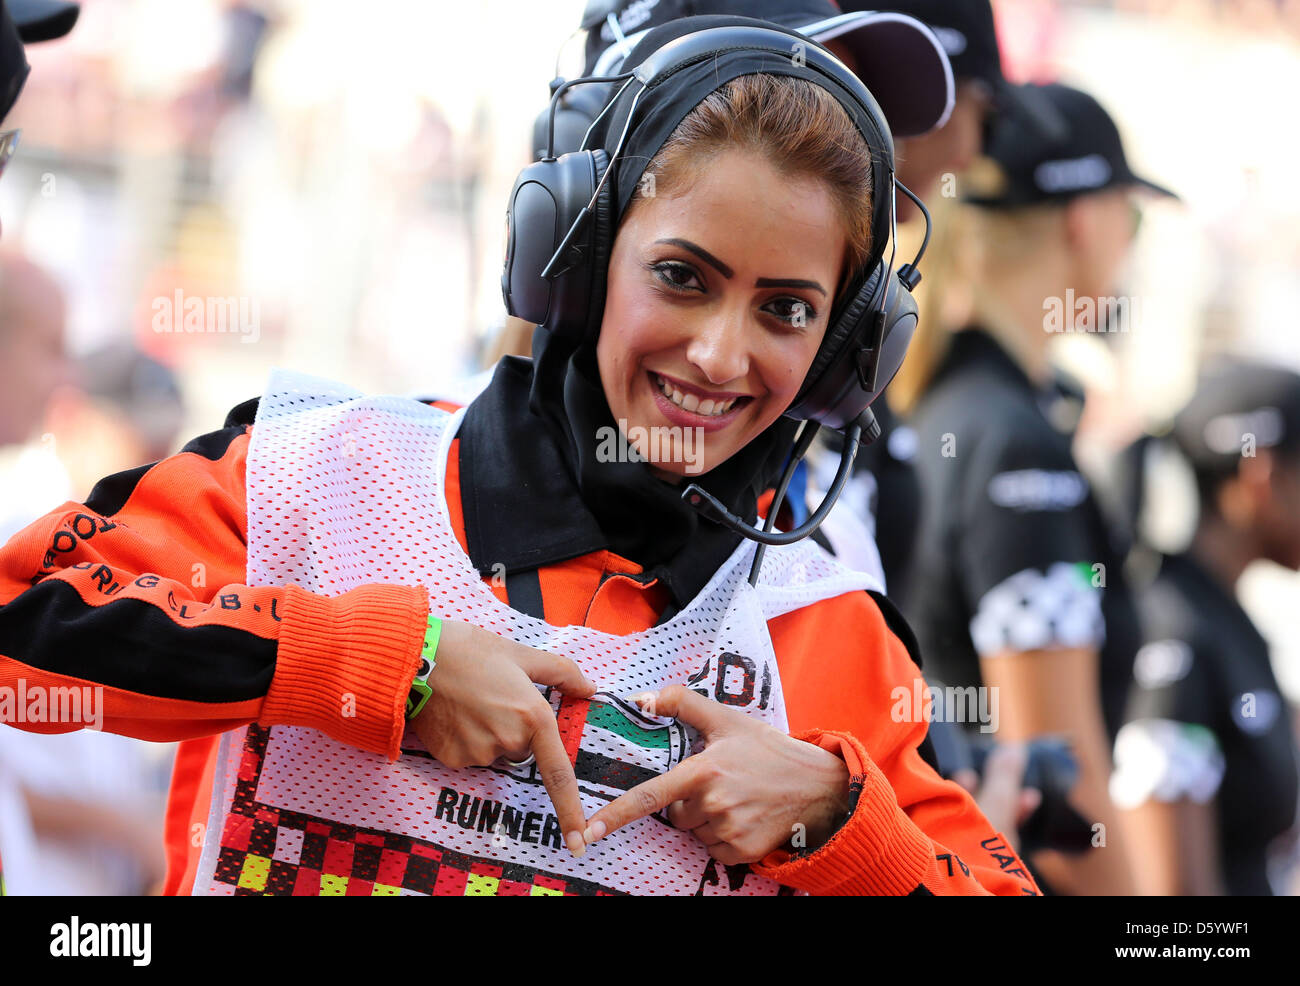 A marshal is seen during the driver's parade before the start of the Formula One Grand Prix of Abu Dhabi at the Yas Marina Circuit in Abu Dhabi, United Arab Emirates, 04 November 2012. Photo: Jens Buettner/dpa  +++(c) dpa - Bildfunk+++ Stock Photo